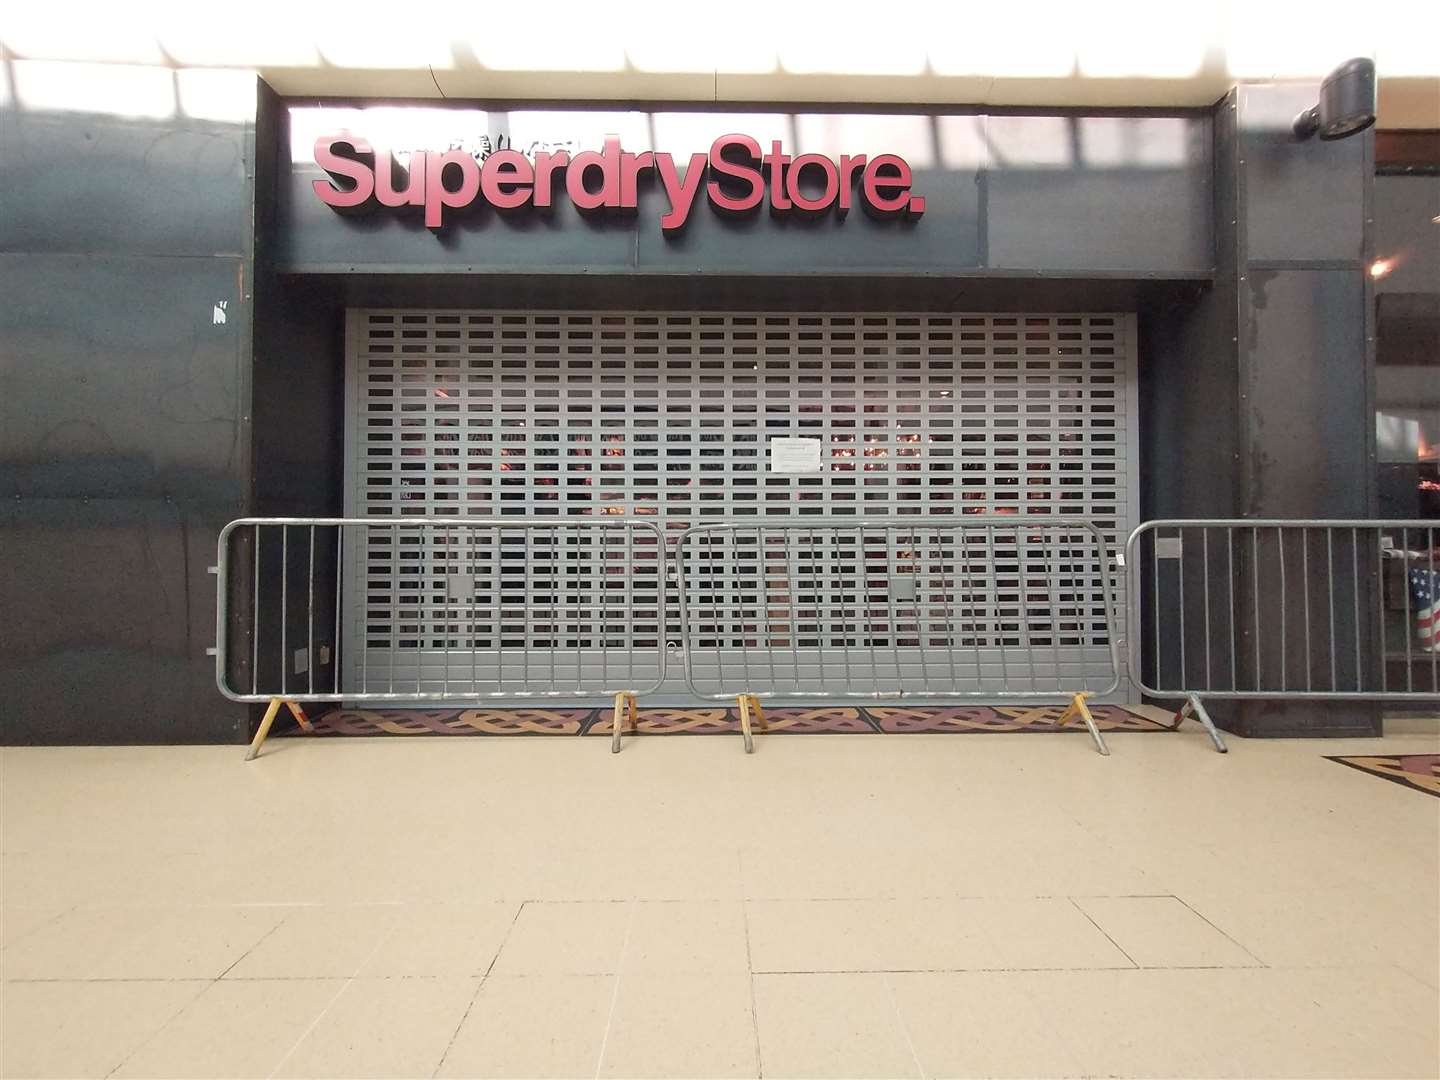 Nothing doing today. The Eastgate Centre's Superdry store closed due to a shutter problem.